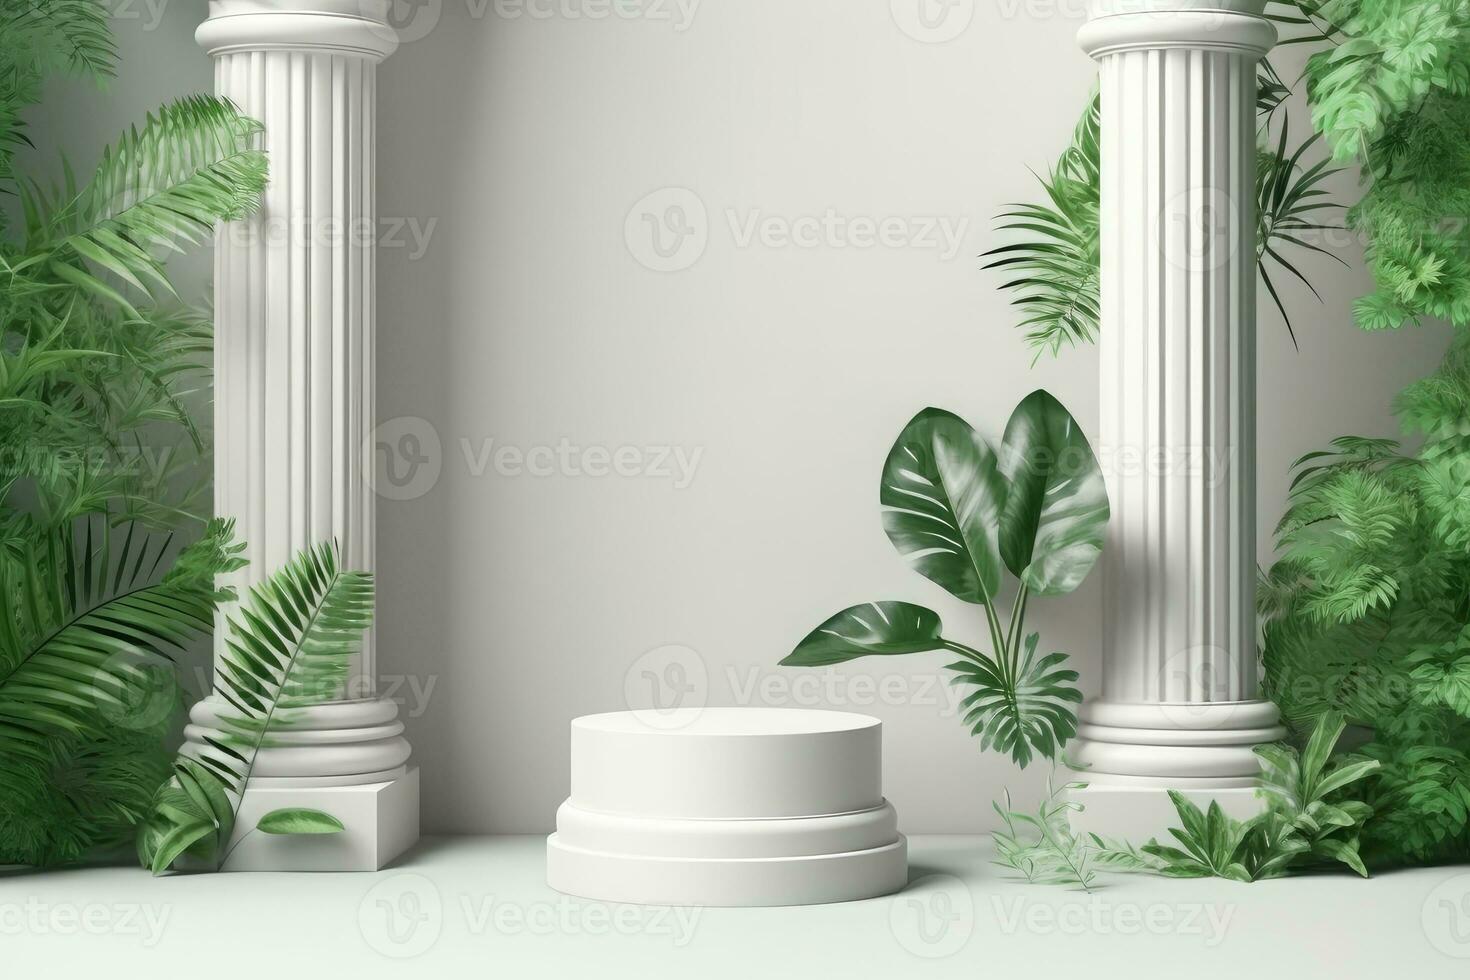 A white round podium with a plant in it and a white vase with a green plant in it photo